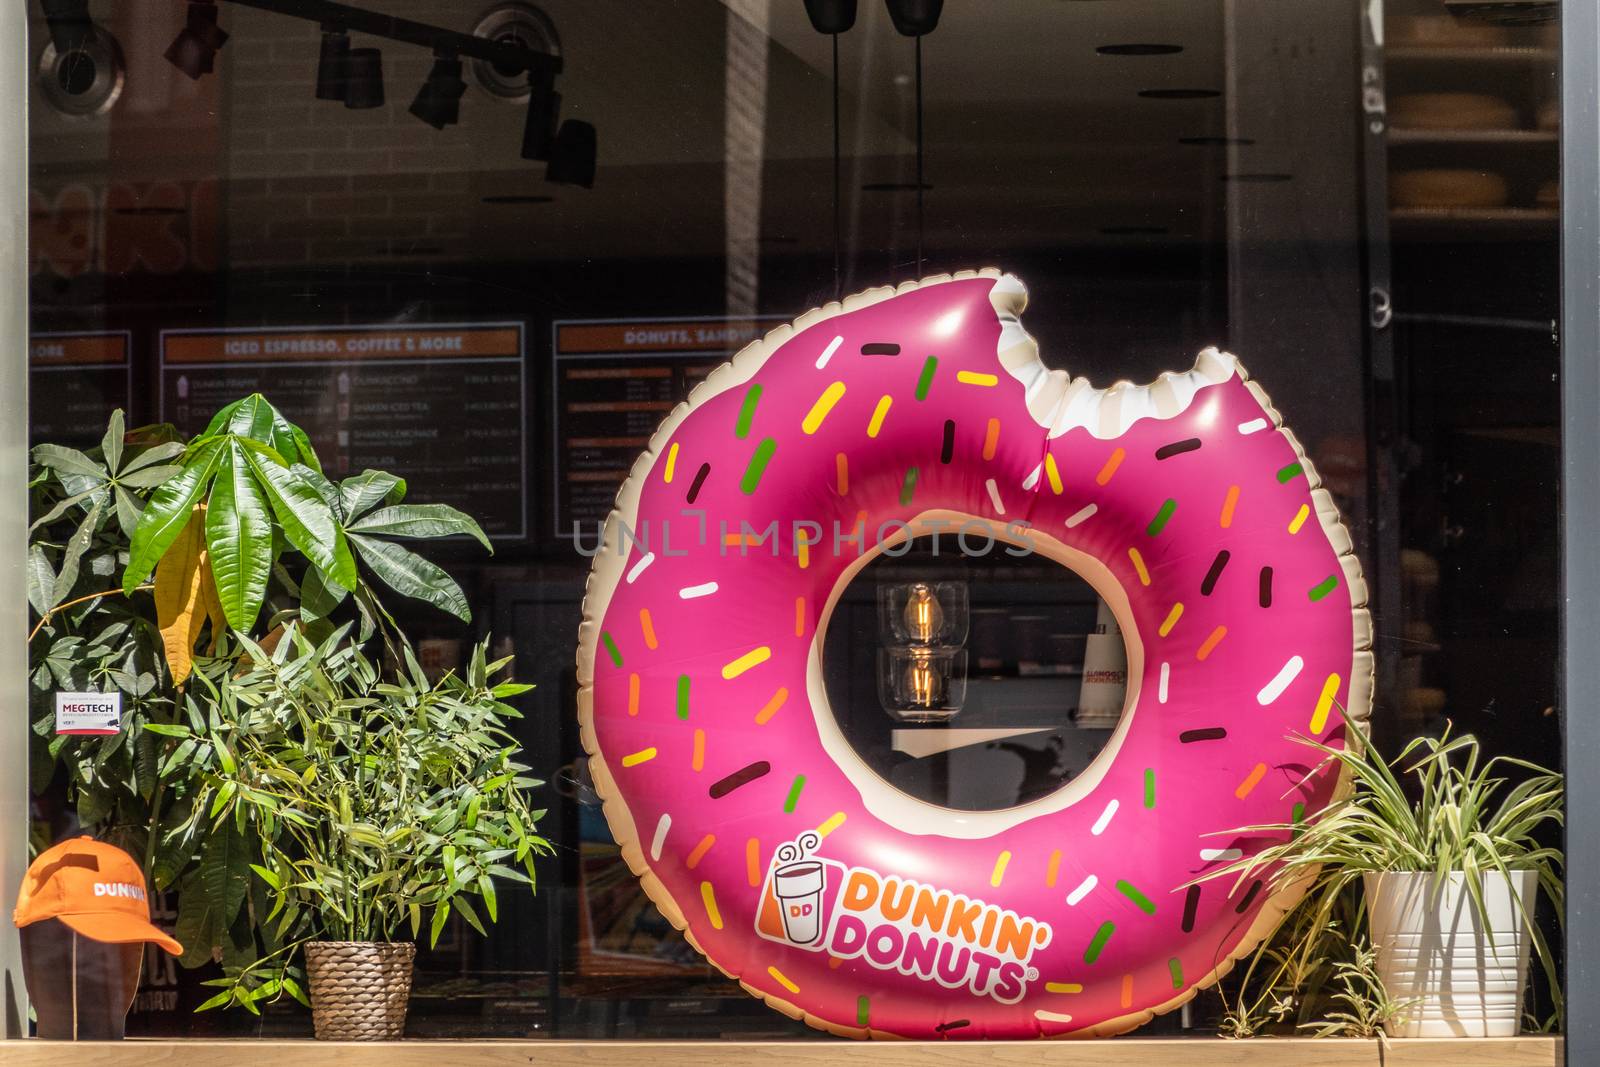 Amsterdam, the Netherlands - July 1, 2019: Giant blown-up image of pink Dunkin’Donuts image in window of shop with same name.